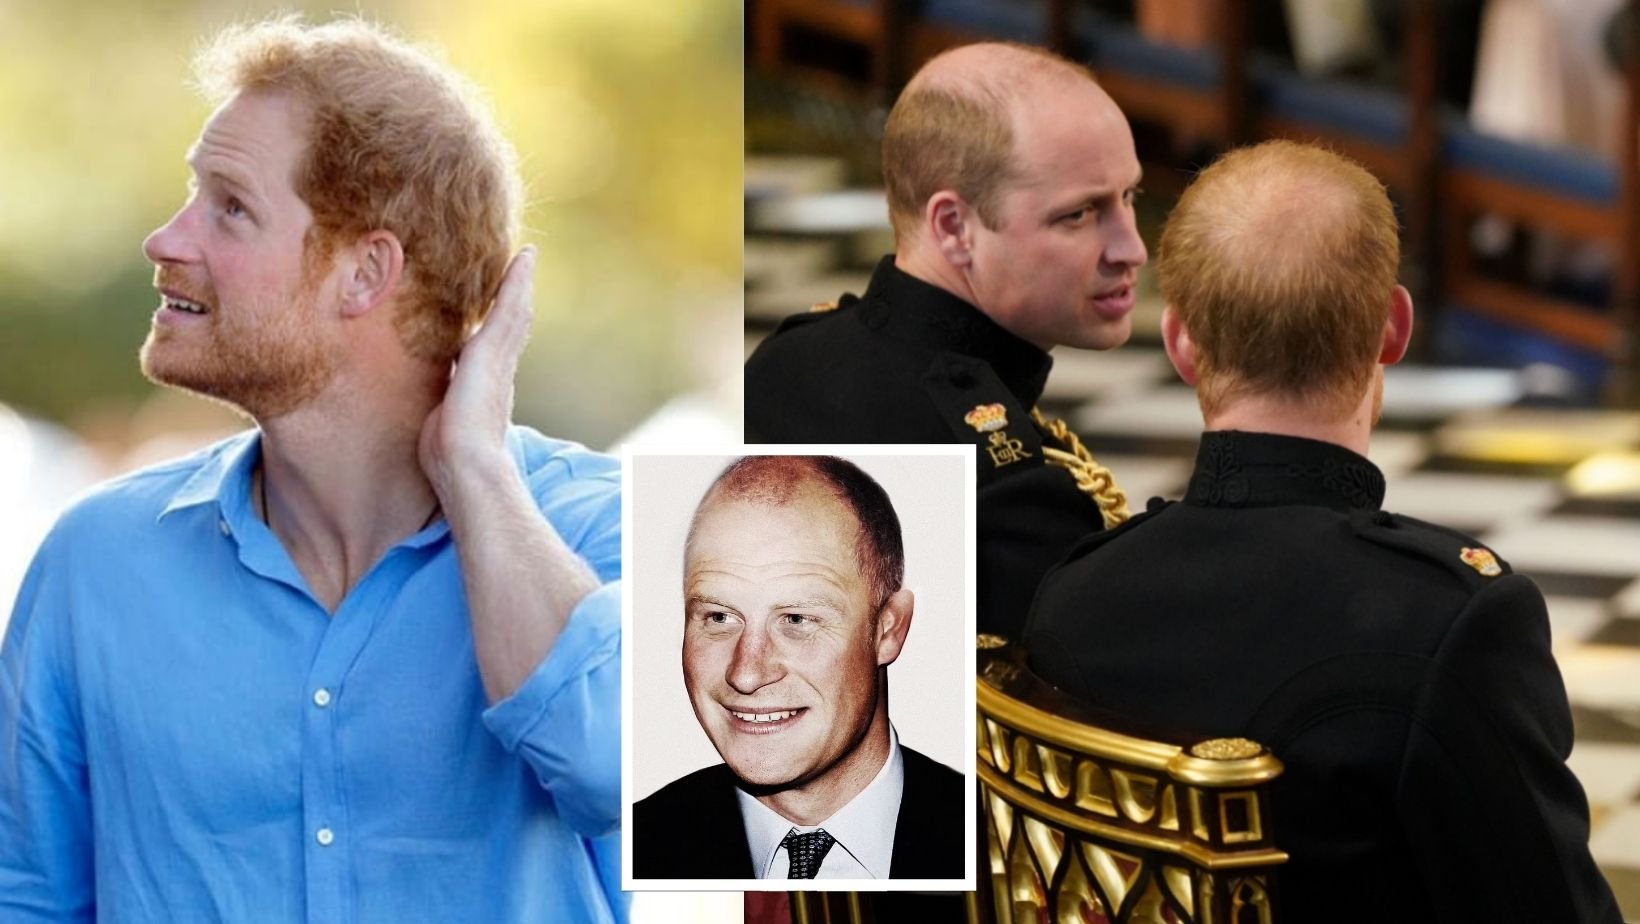 cover 12.jpg?resize=412,232 - Prince Harry’s Hair Loss Is Getting Worse Since He Moved To The US, Cosmetic Doctor Claims He Will Be Completely Bald At 50